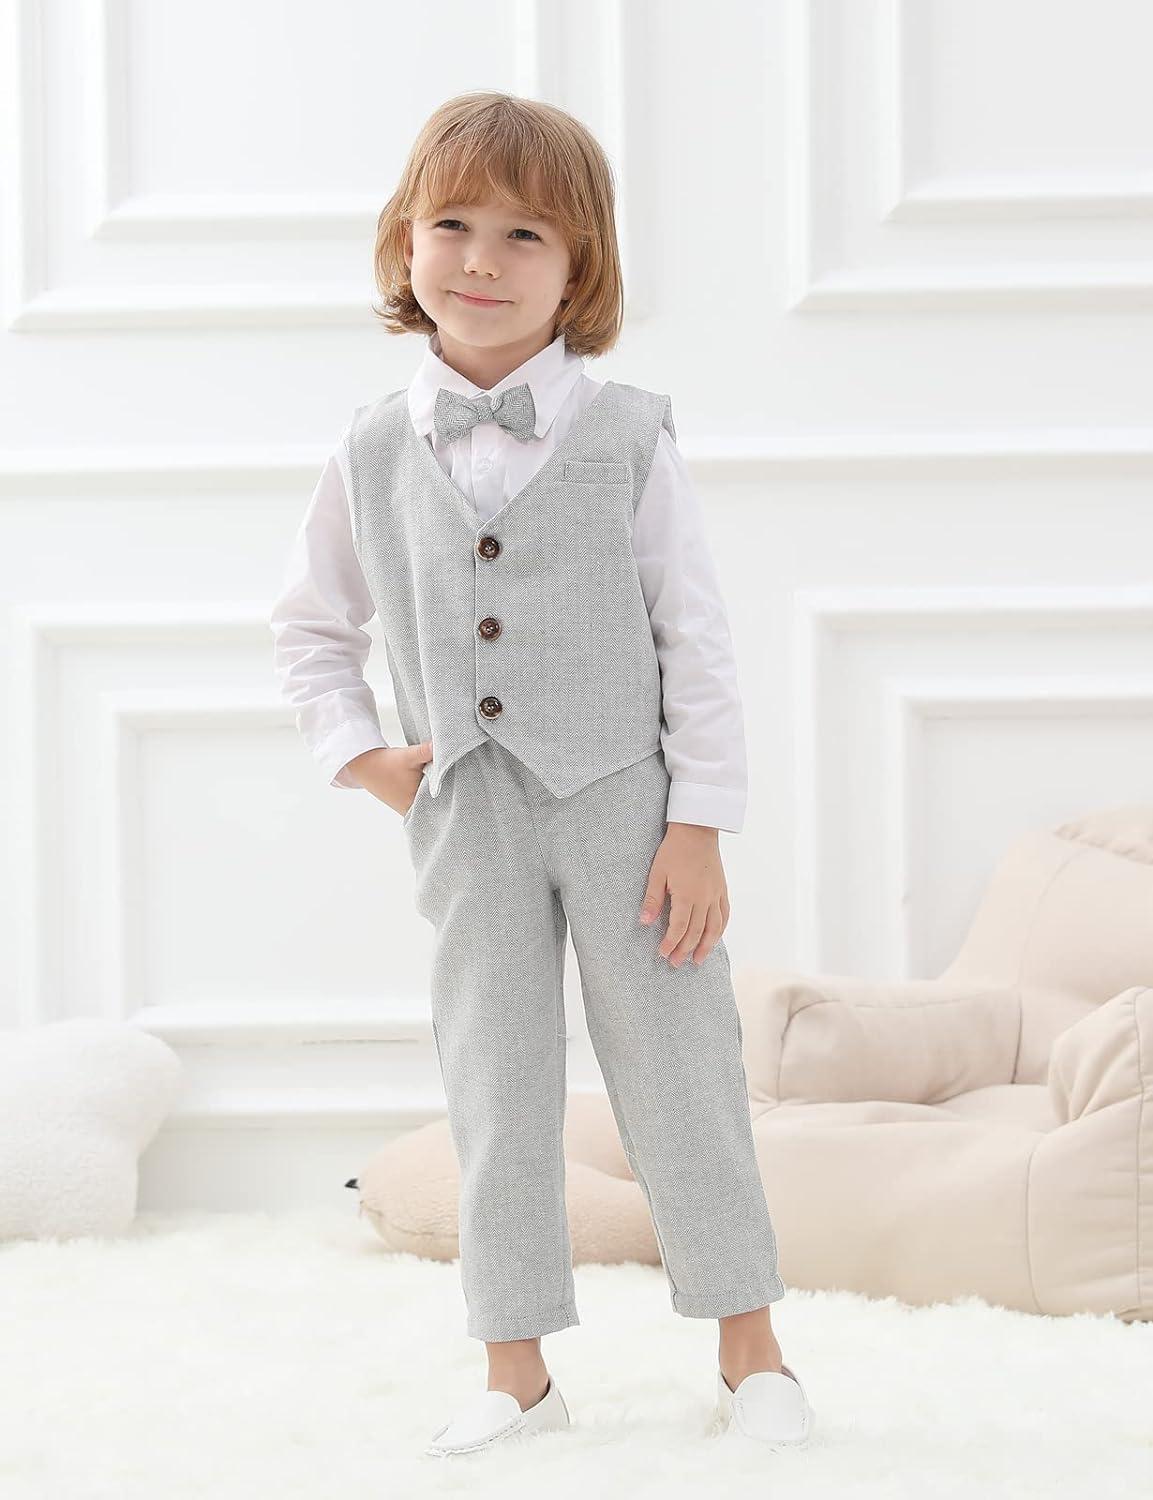 RING BEARER Tweed Herringbone LOOK Vest Bow Tie Outfit Infant Toddler Child  Sizes Thru Youth 10 